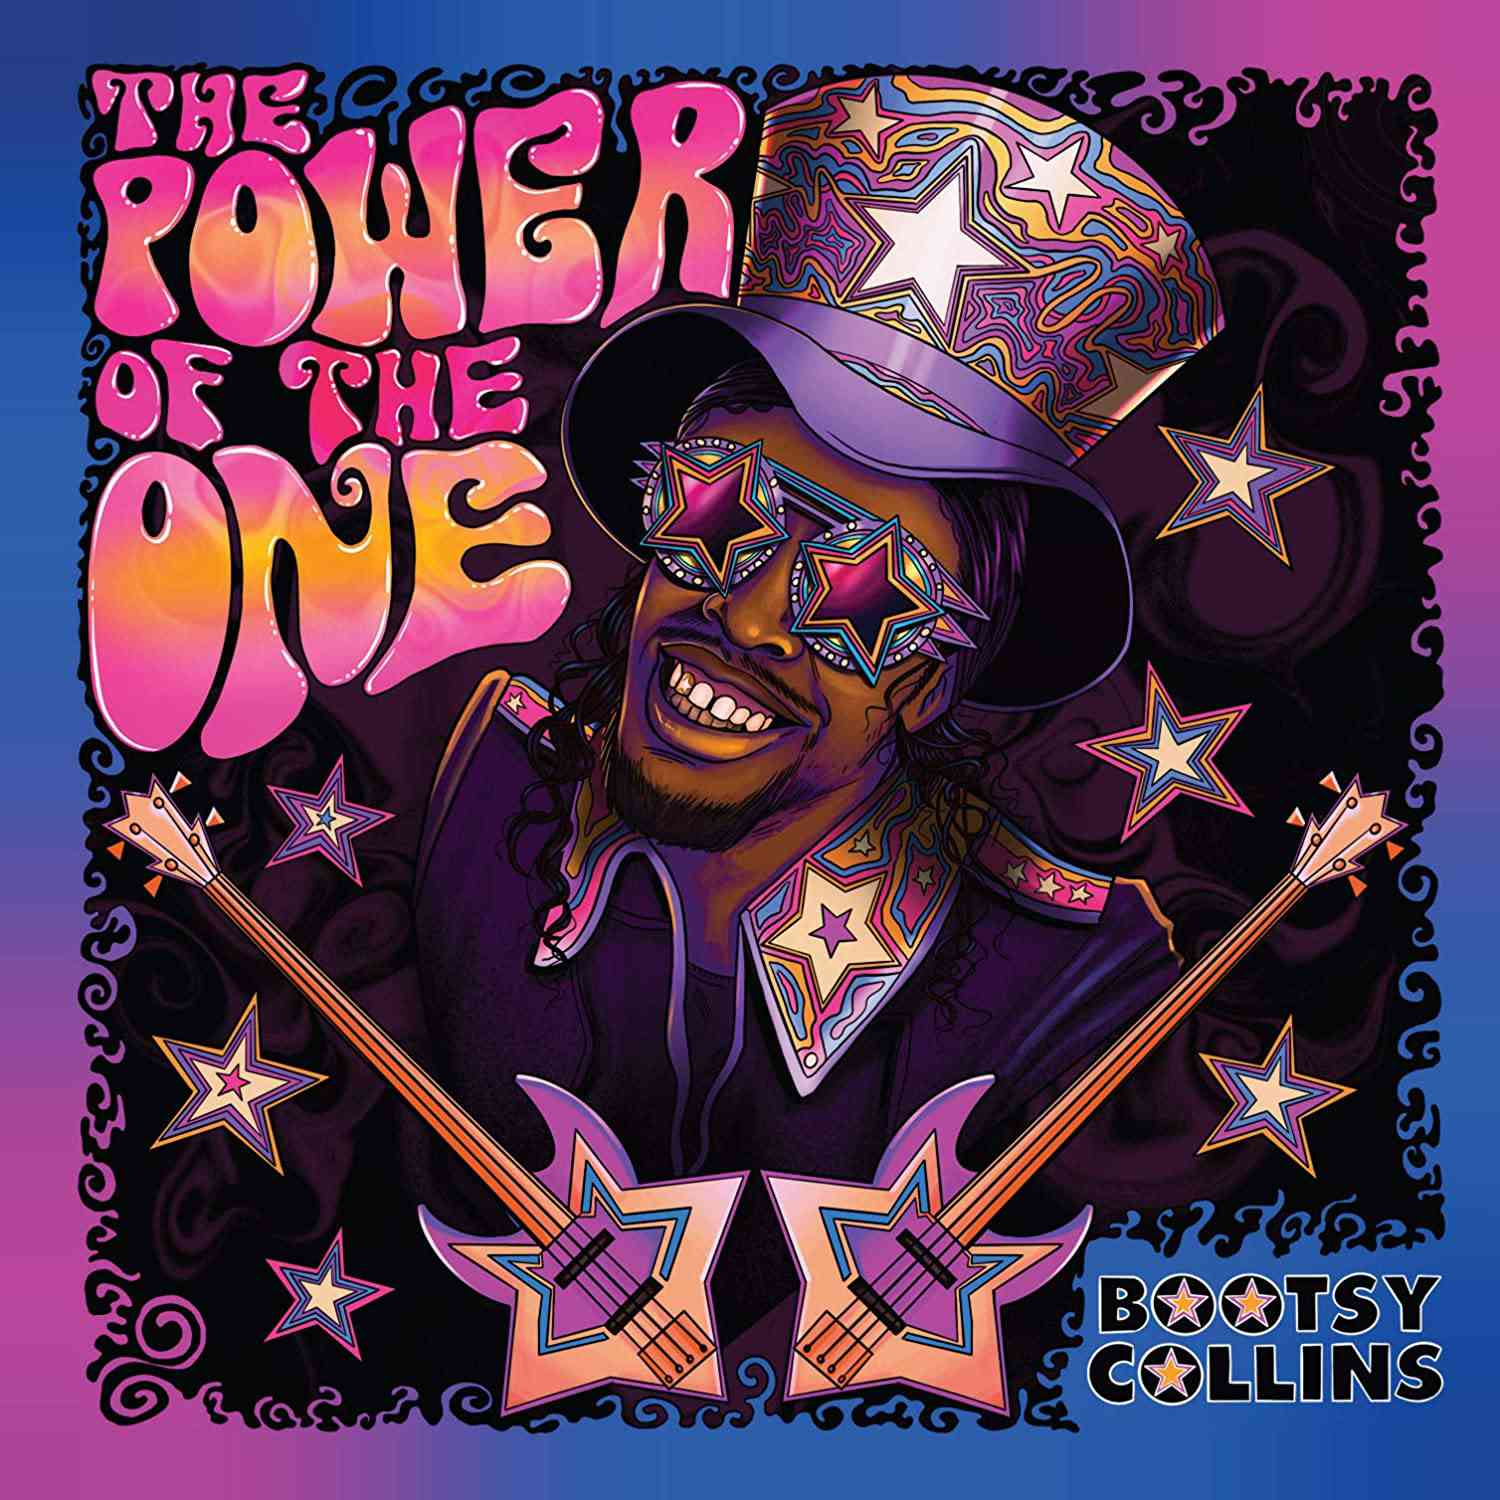 The Power of One by Bootsy Collins